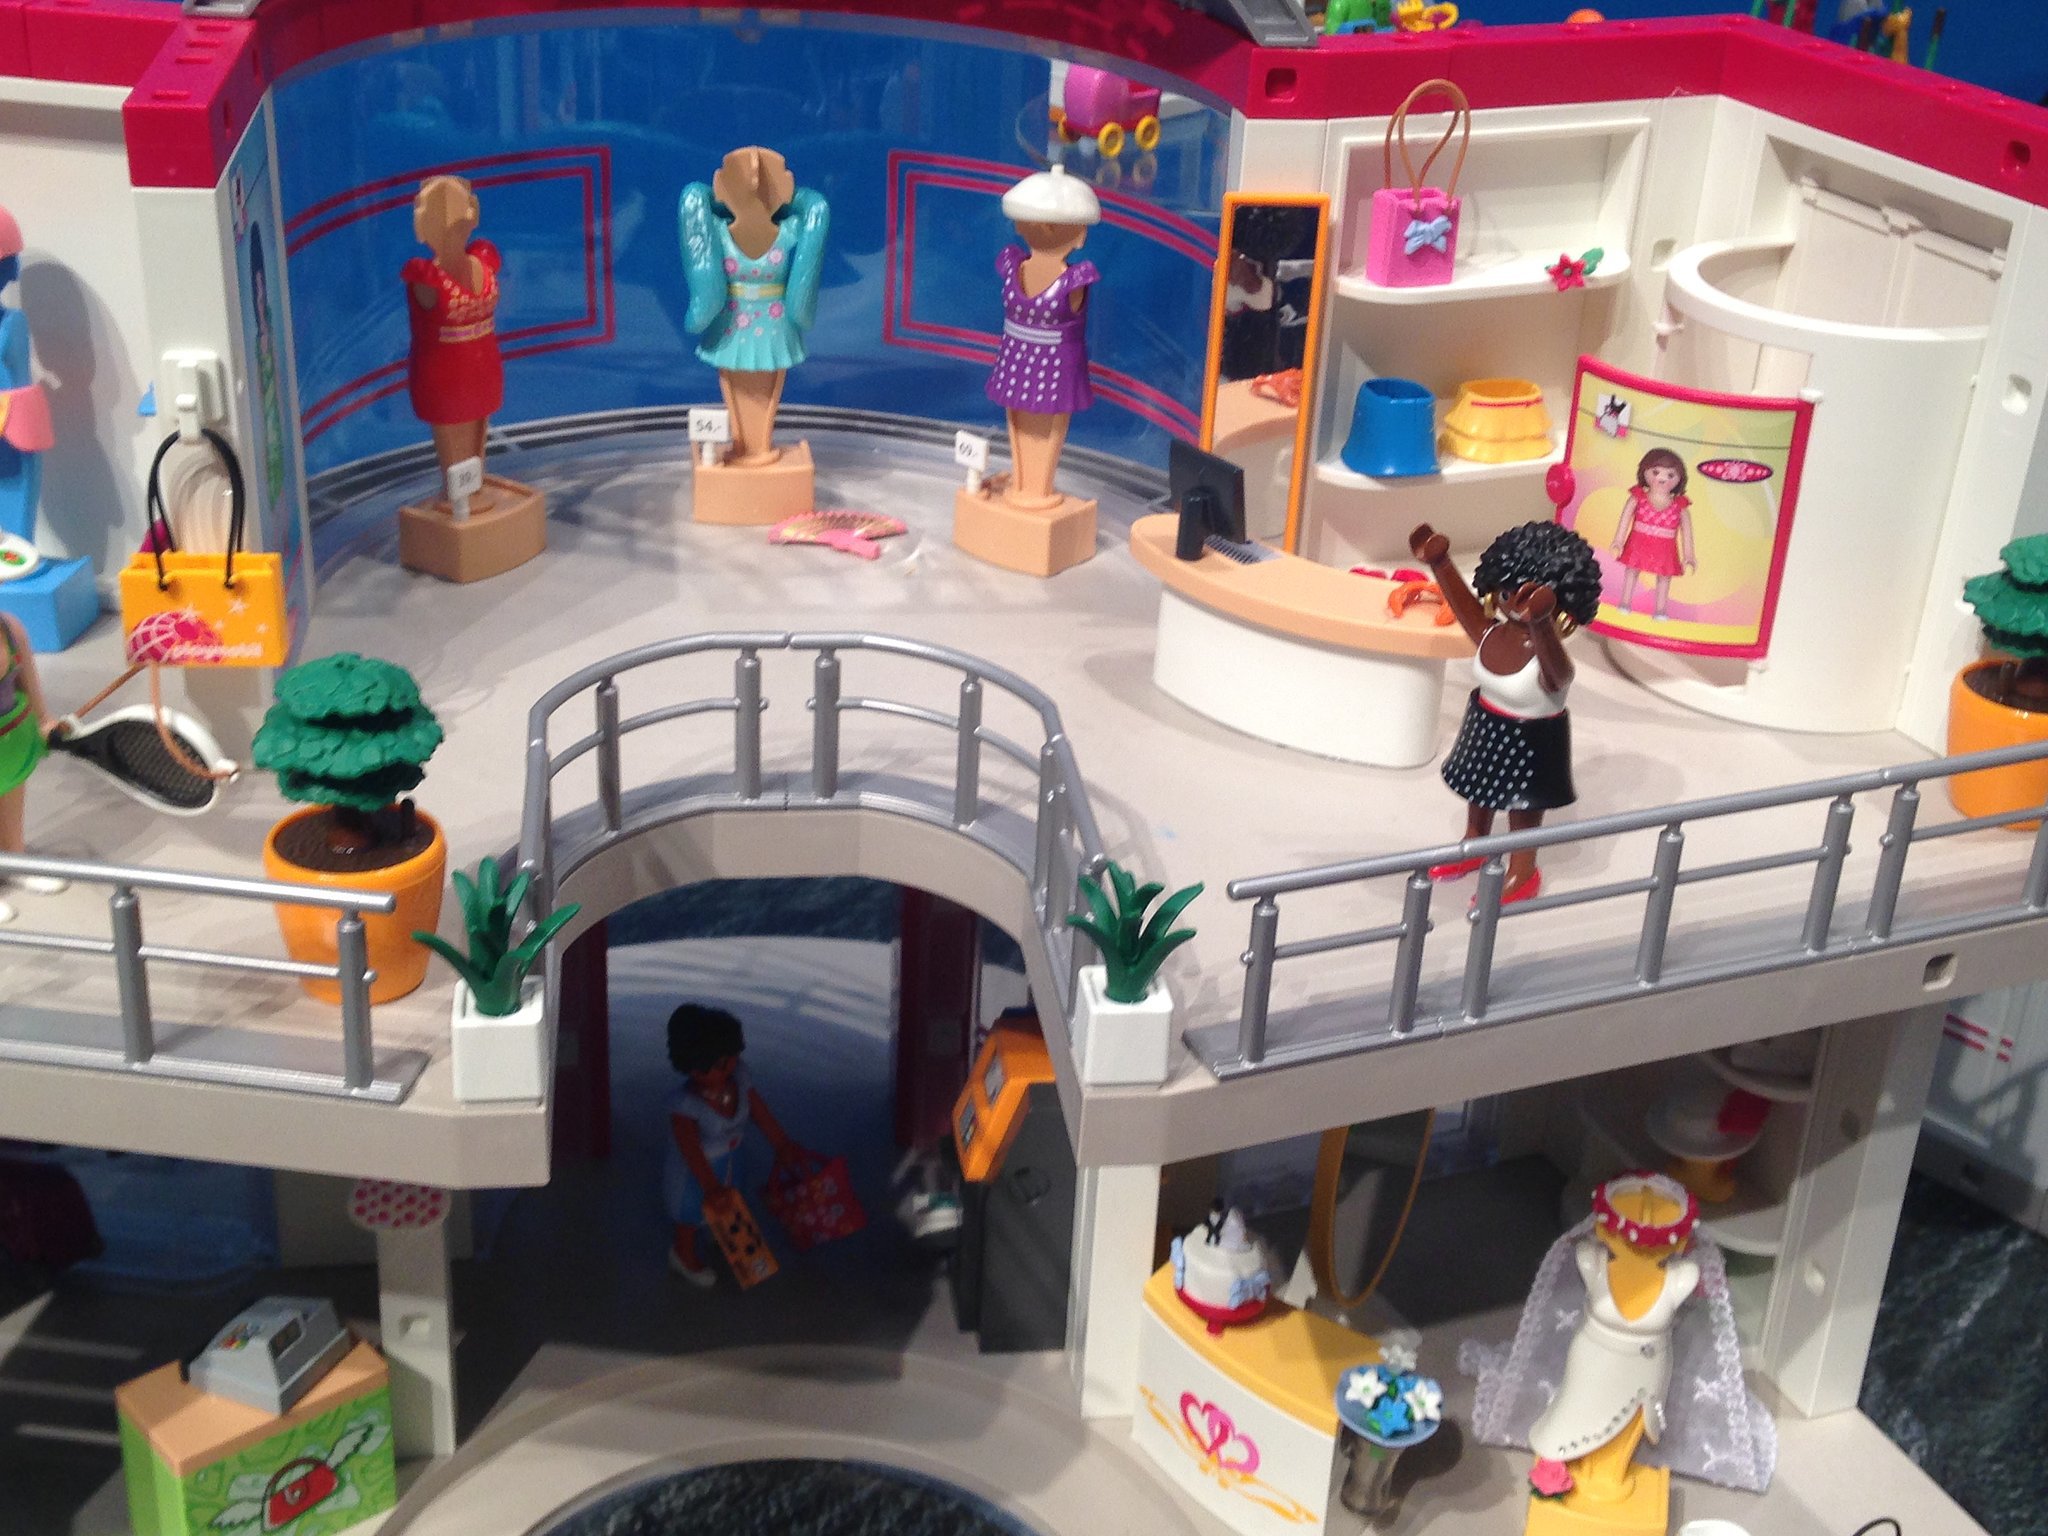 Playmobil Fashion Mall | Your Sneak Peek at 200+ Toys Coming Your Way